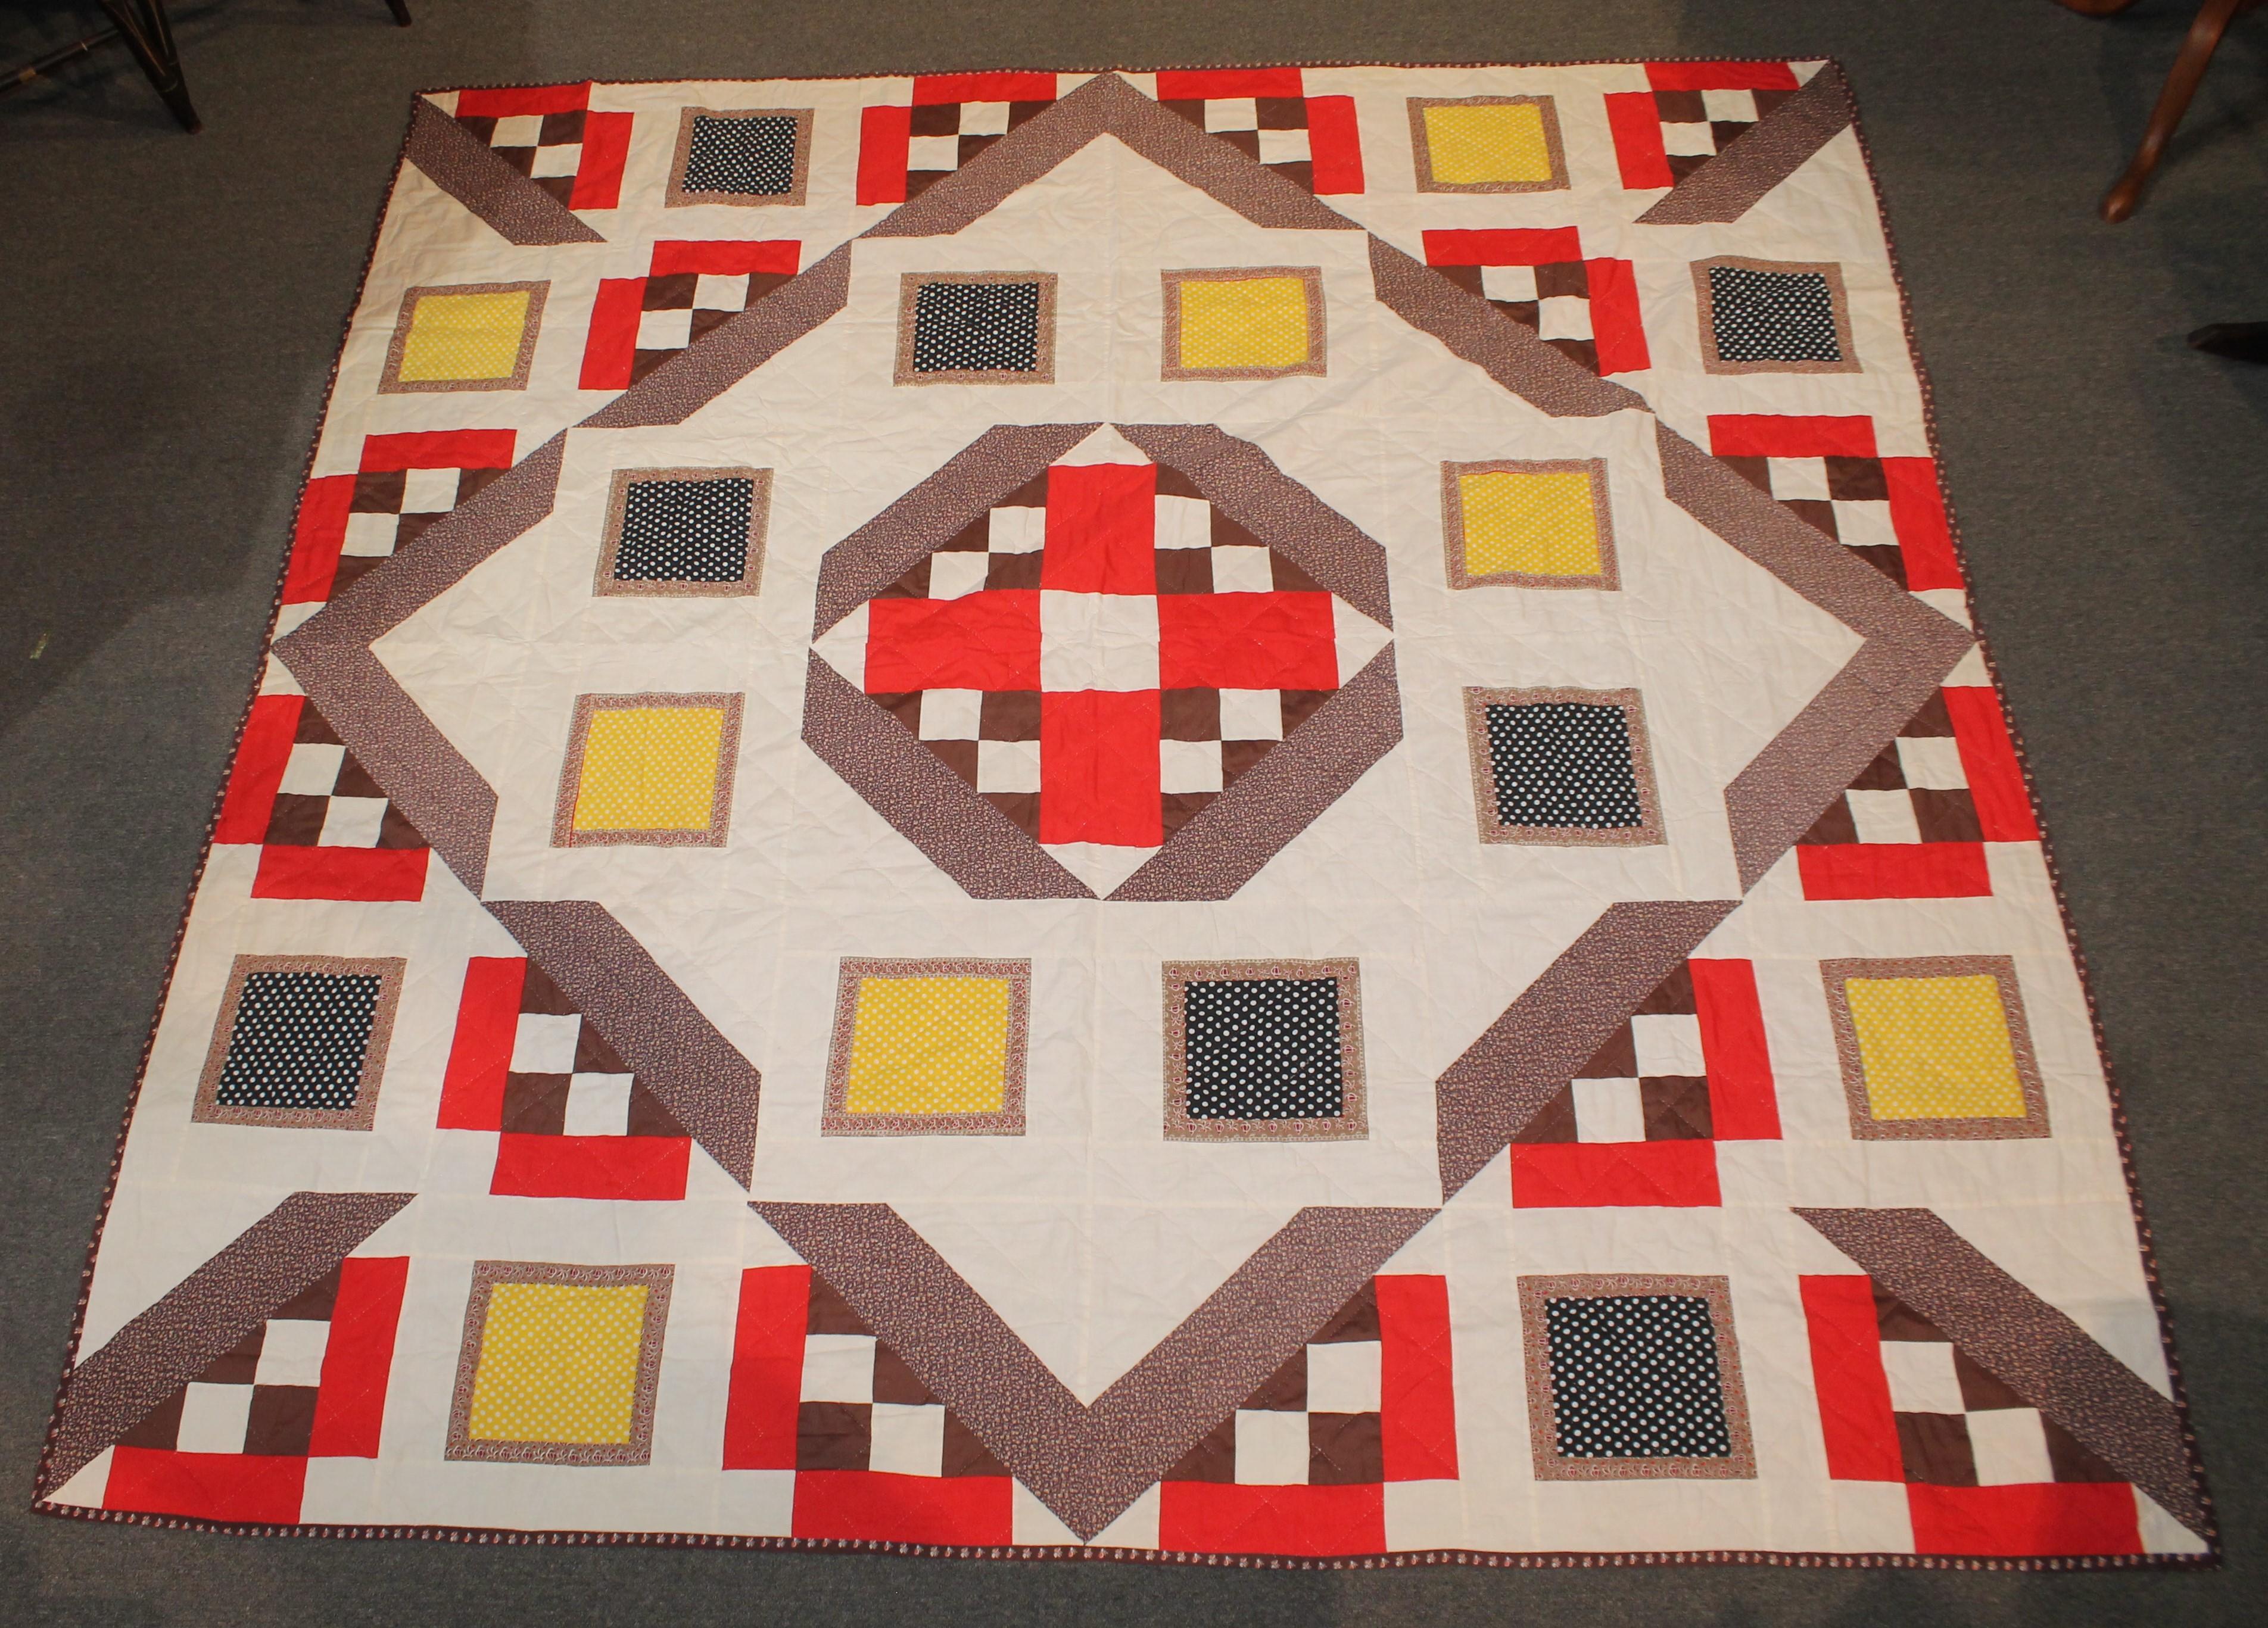 This modern stylistic geometric block pattern is from the 1960s and has a great unusual block pattern. The backing is in a brown calico fabric.